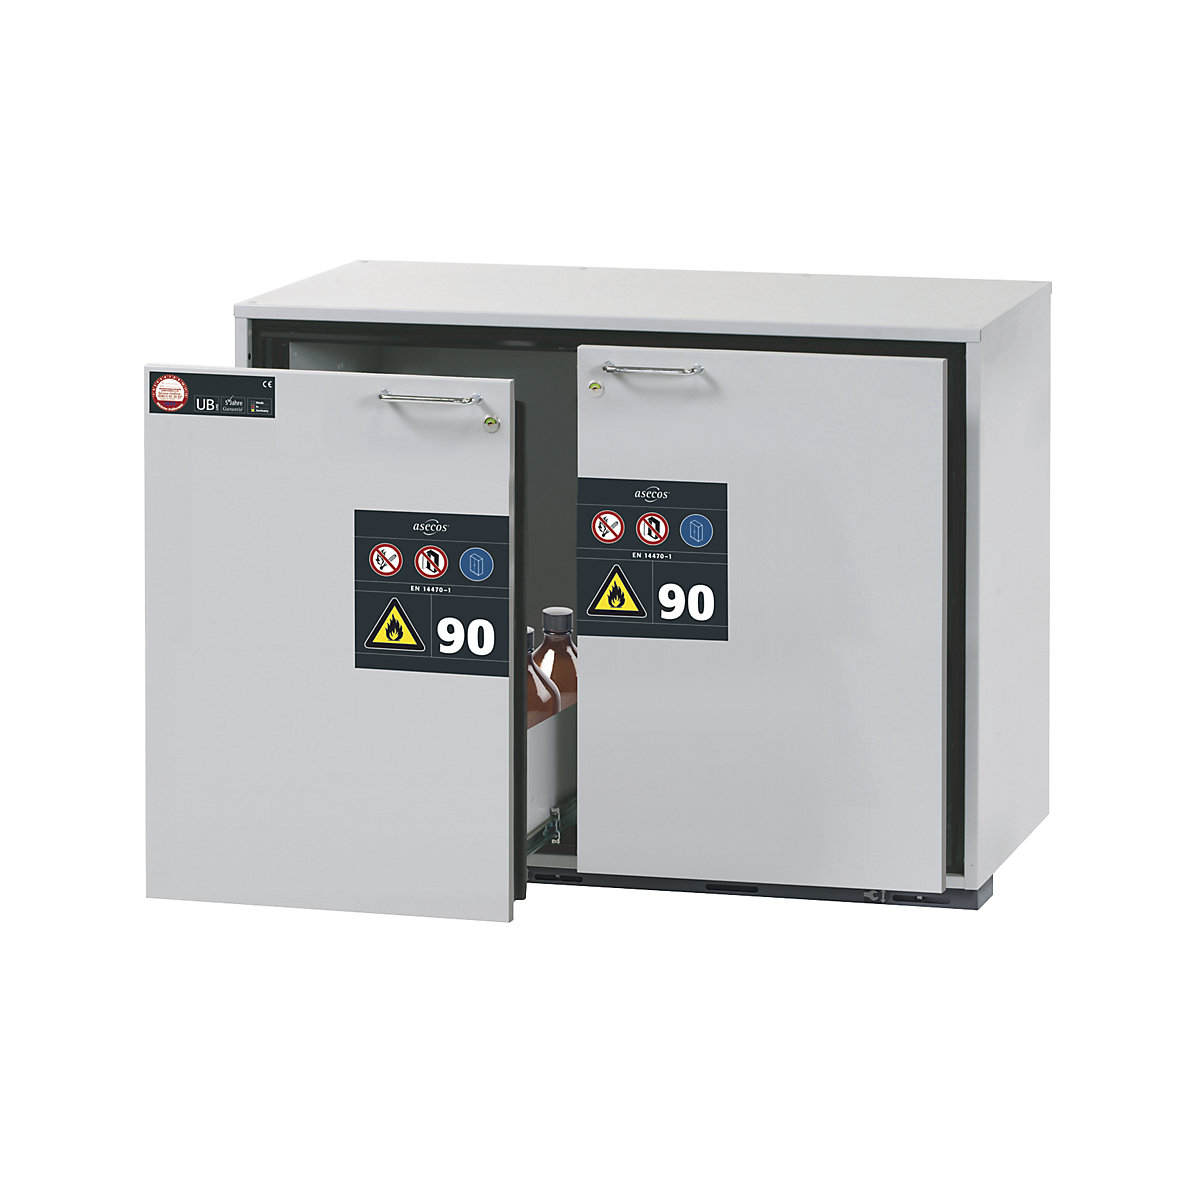 Type 90 fire resistant add-on drawer unit for hazardous goods - asecos